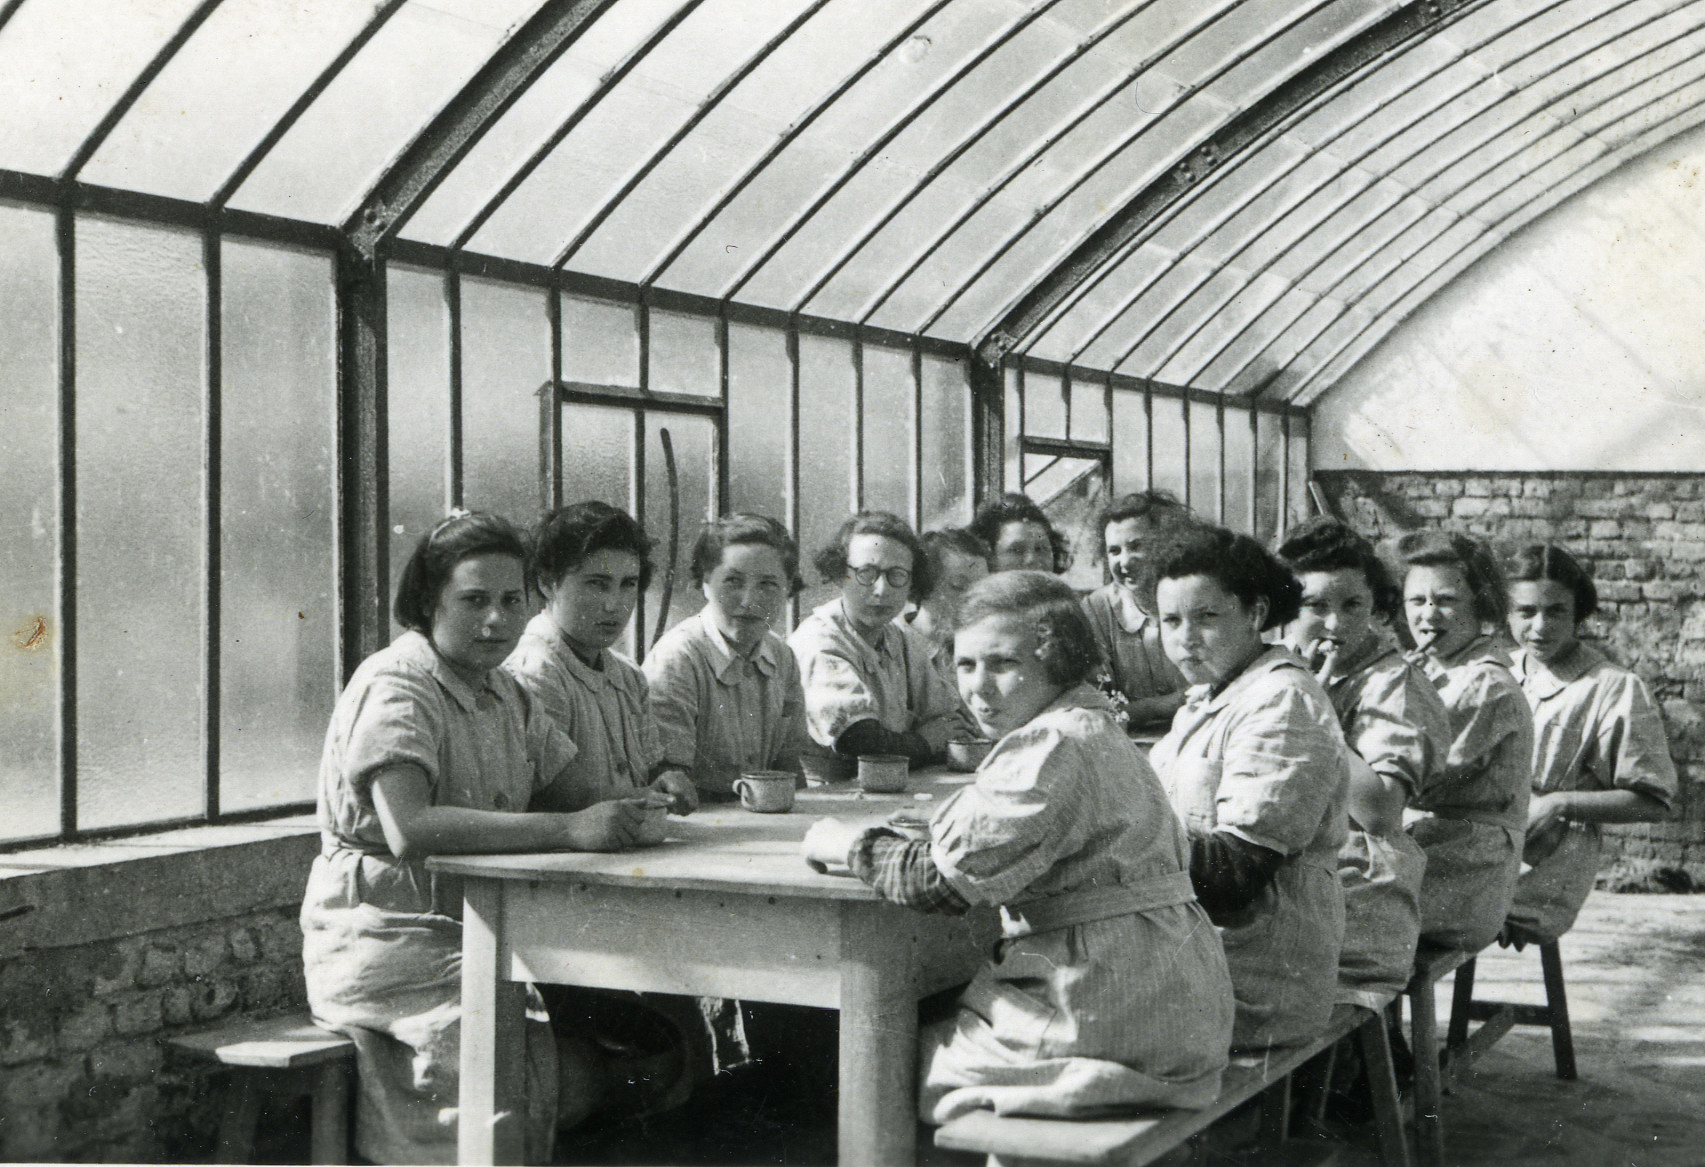 A group of girls gathers for a meal in the dining hall of a children's home in Aische en Refail.

The dining hall had been converted from a former greenhouse.